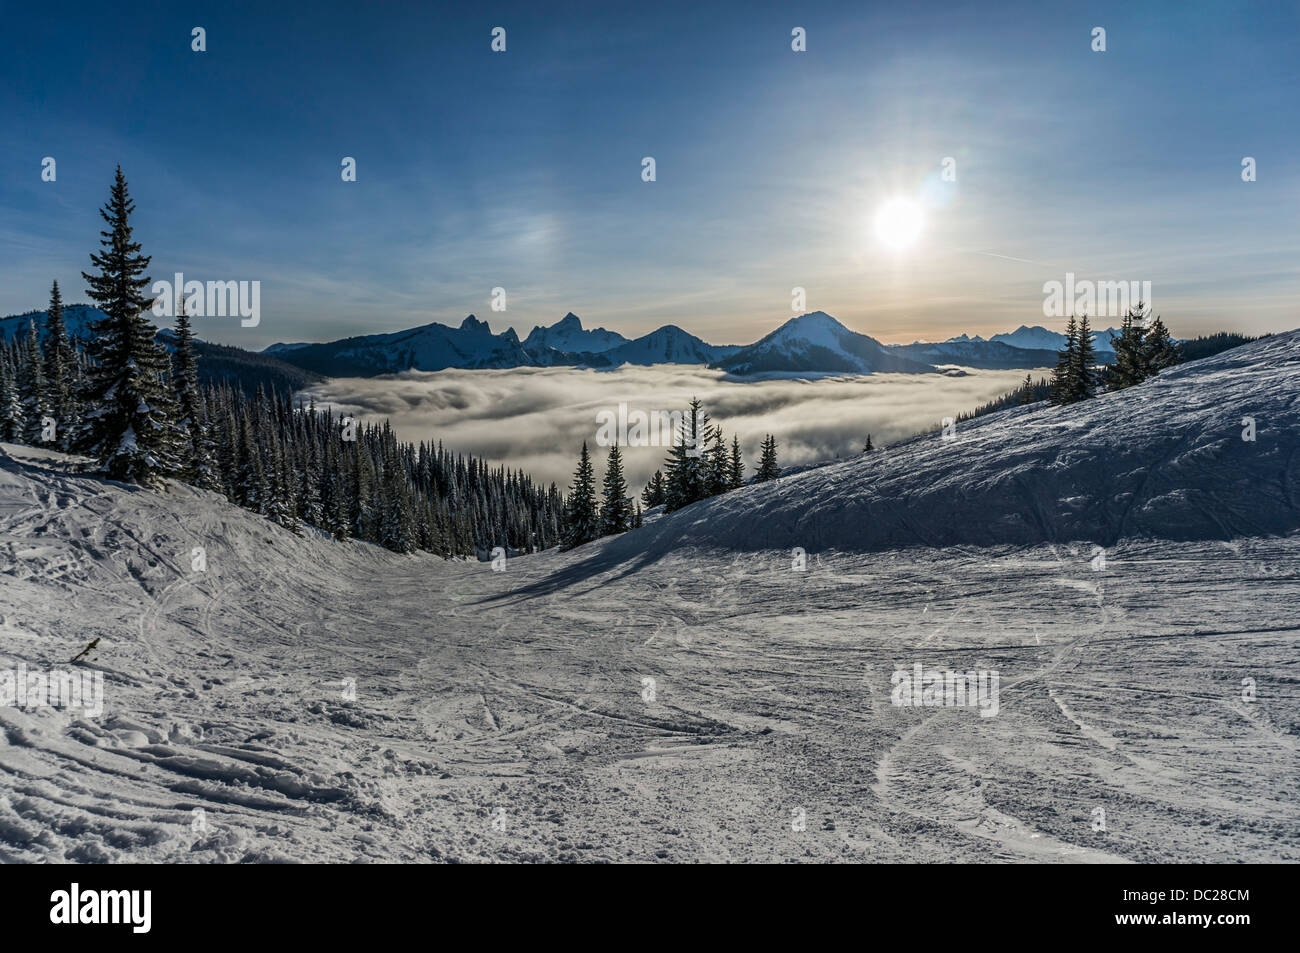 View from the top of Gibson's Pass Ski resort in Manning Park, British Colombia, Canada. Stock Photo